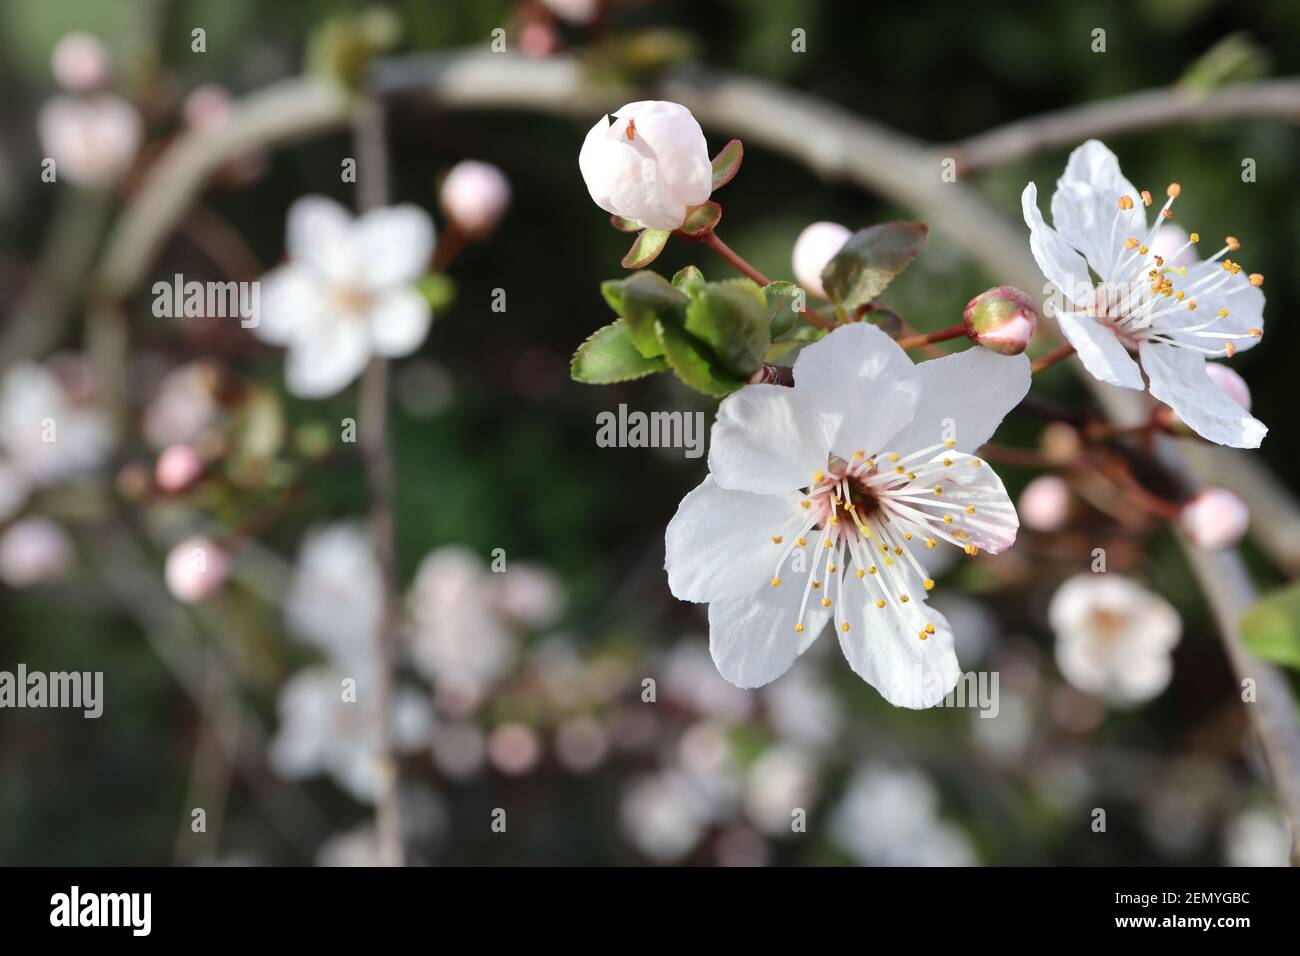 Prunus cerasifera Cherry plum – small white bowl-shaped flowers with many stamens, red stalks, green to brown leaves,  February, England, UK Stock Photo